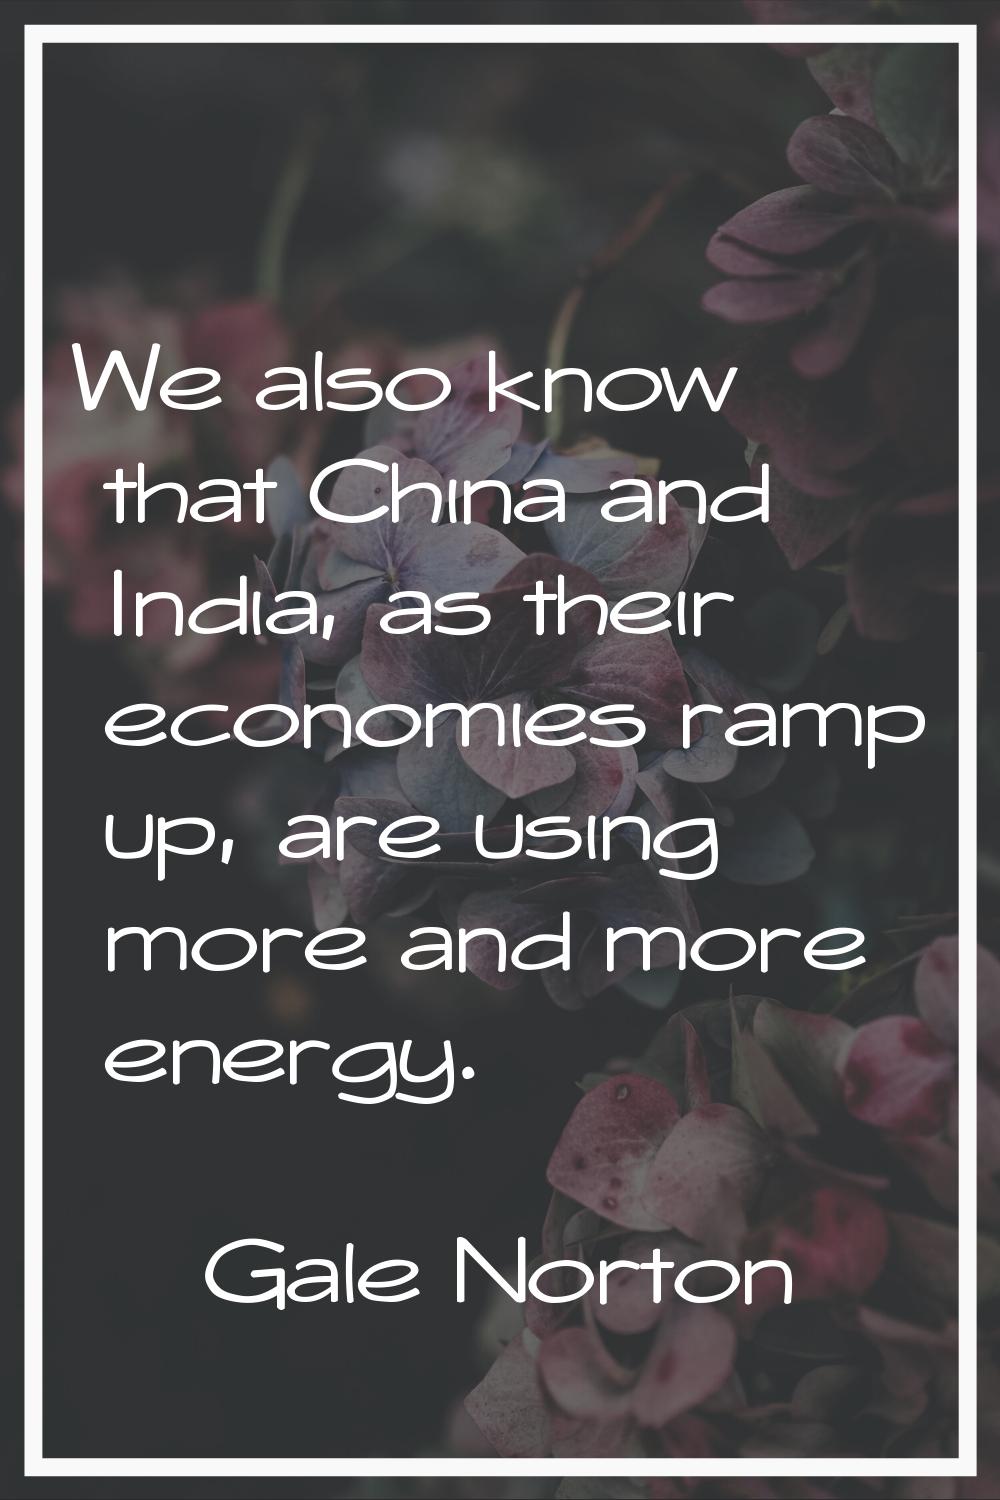 We also know that China and India, as their economies ramp up, are using more and more energy.